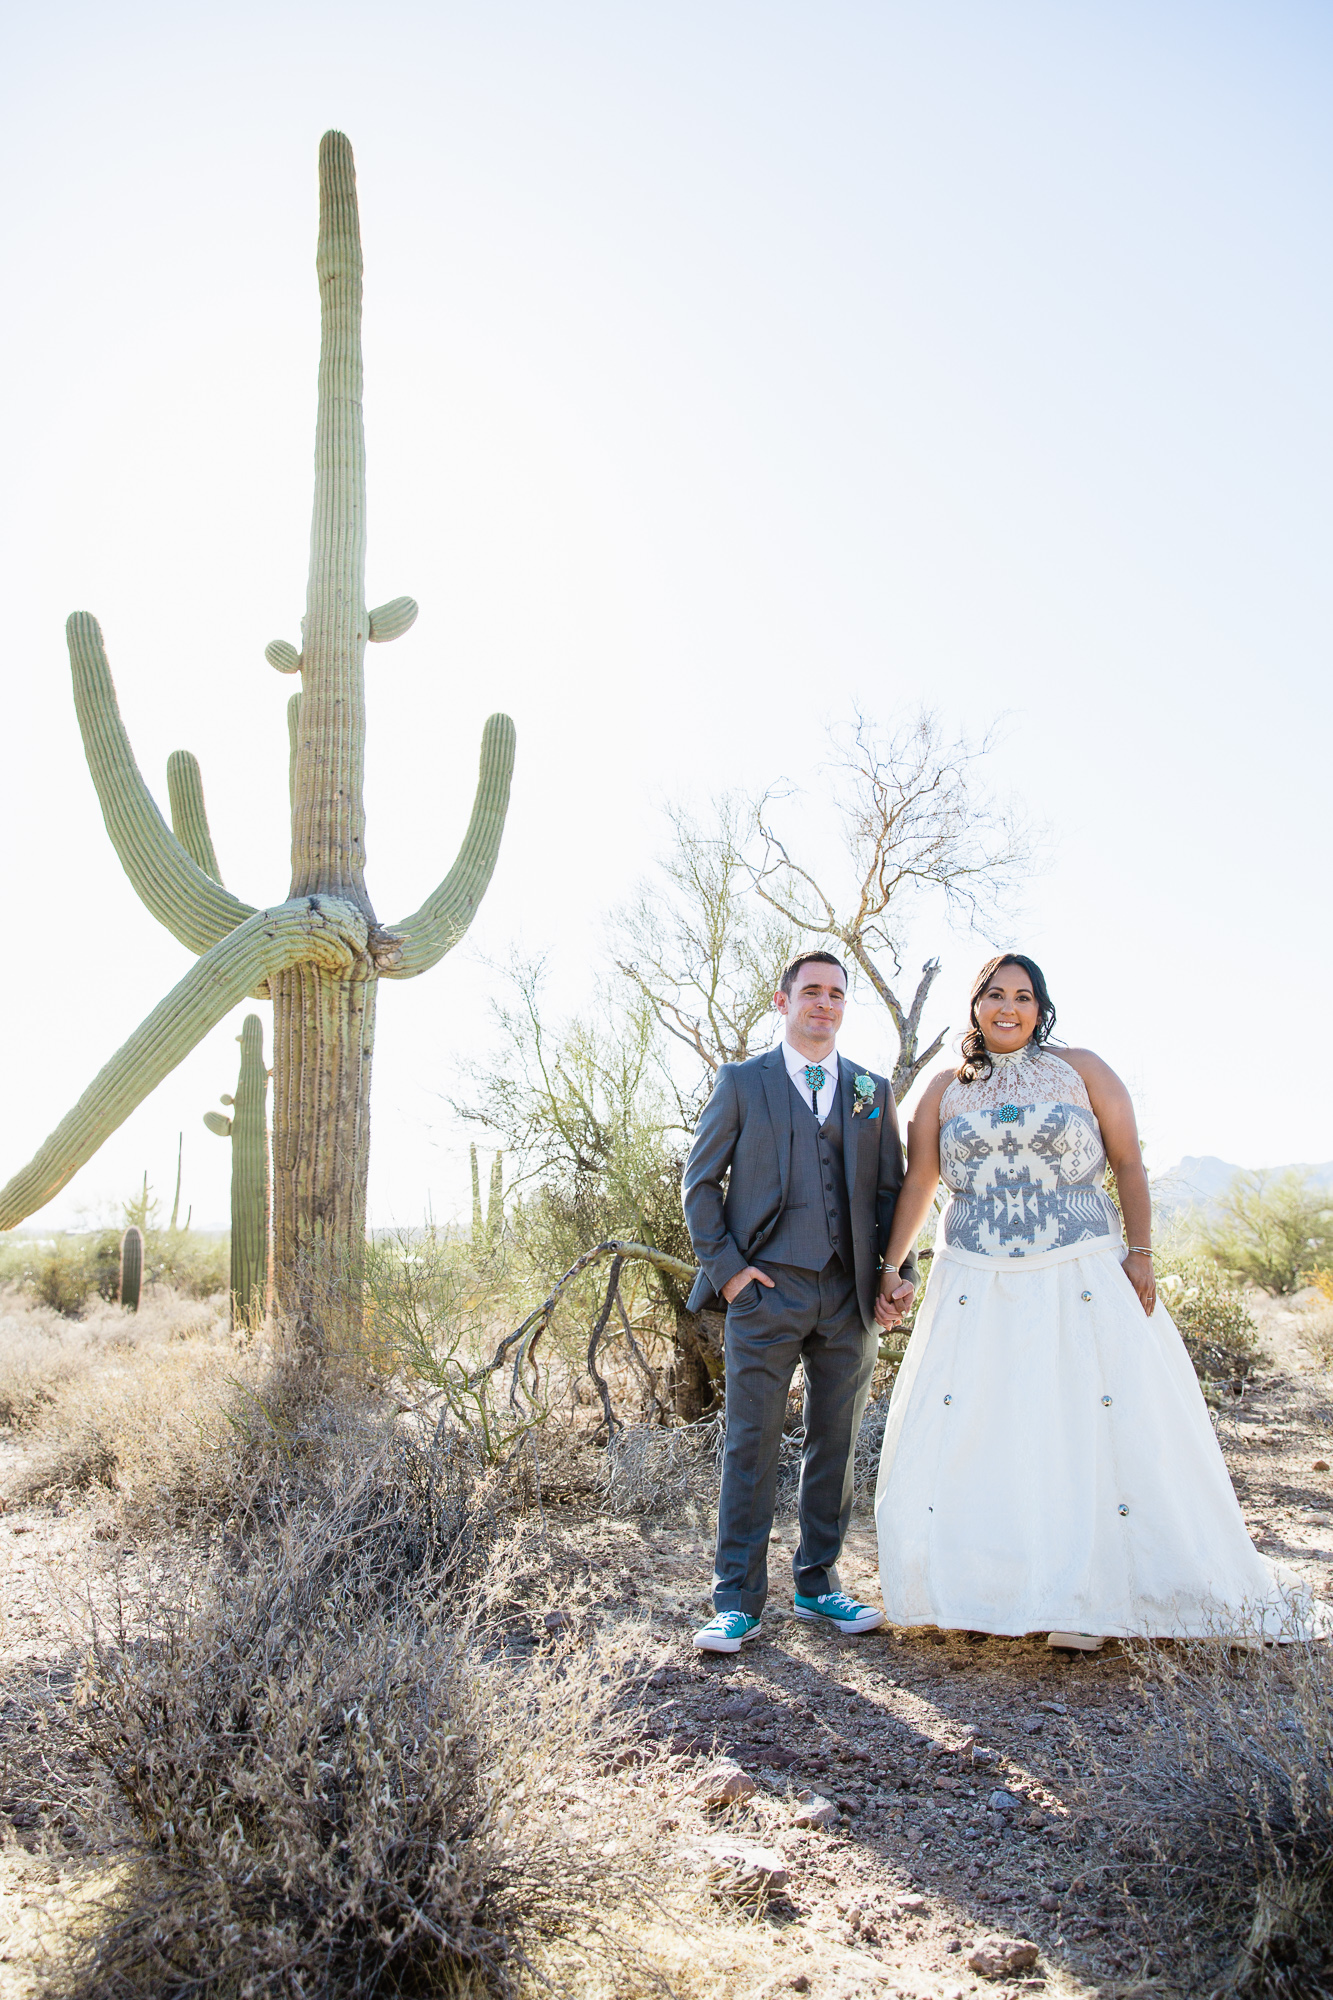 Bride and groom in the Arizona desert at their Lost Dutchman State Park wedding by Arizona wedding photographers PMA Photography.